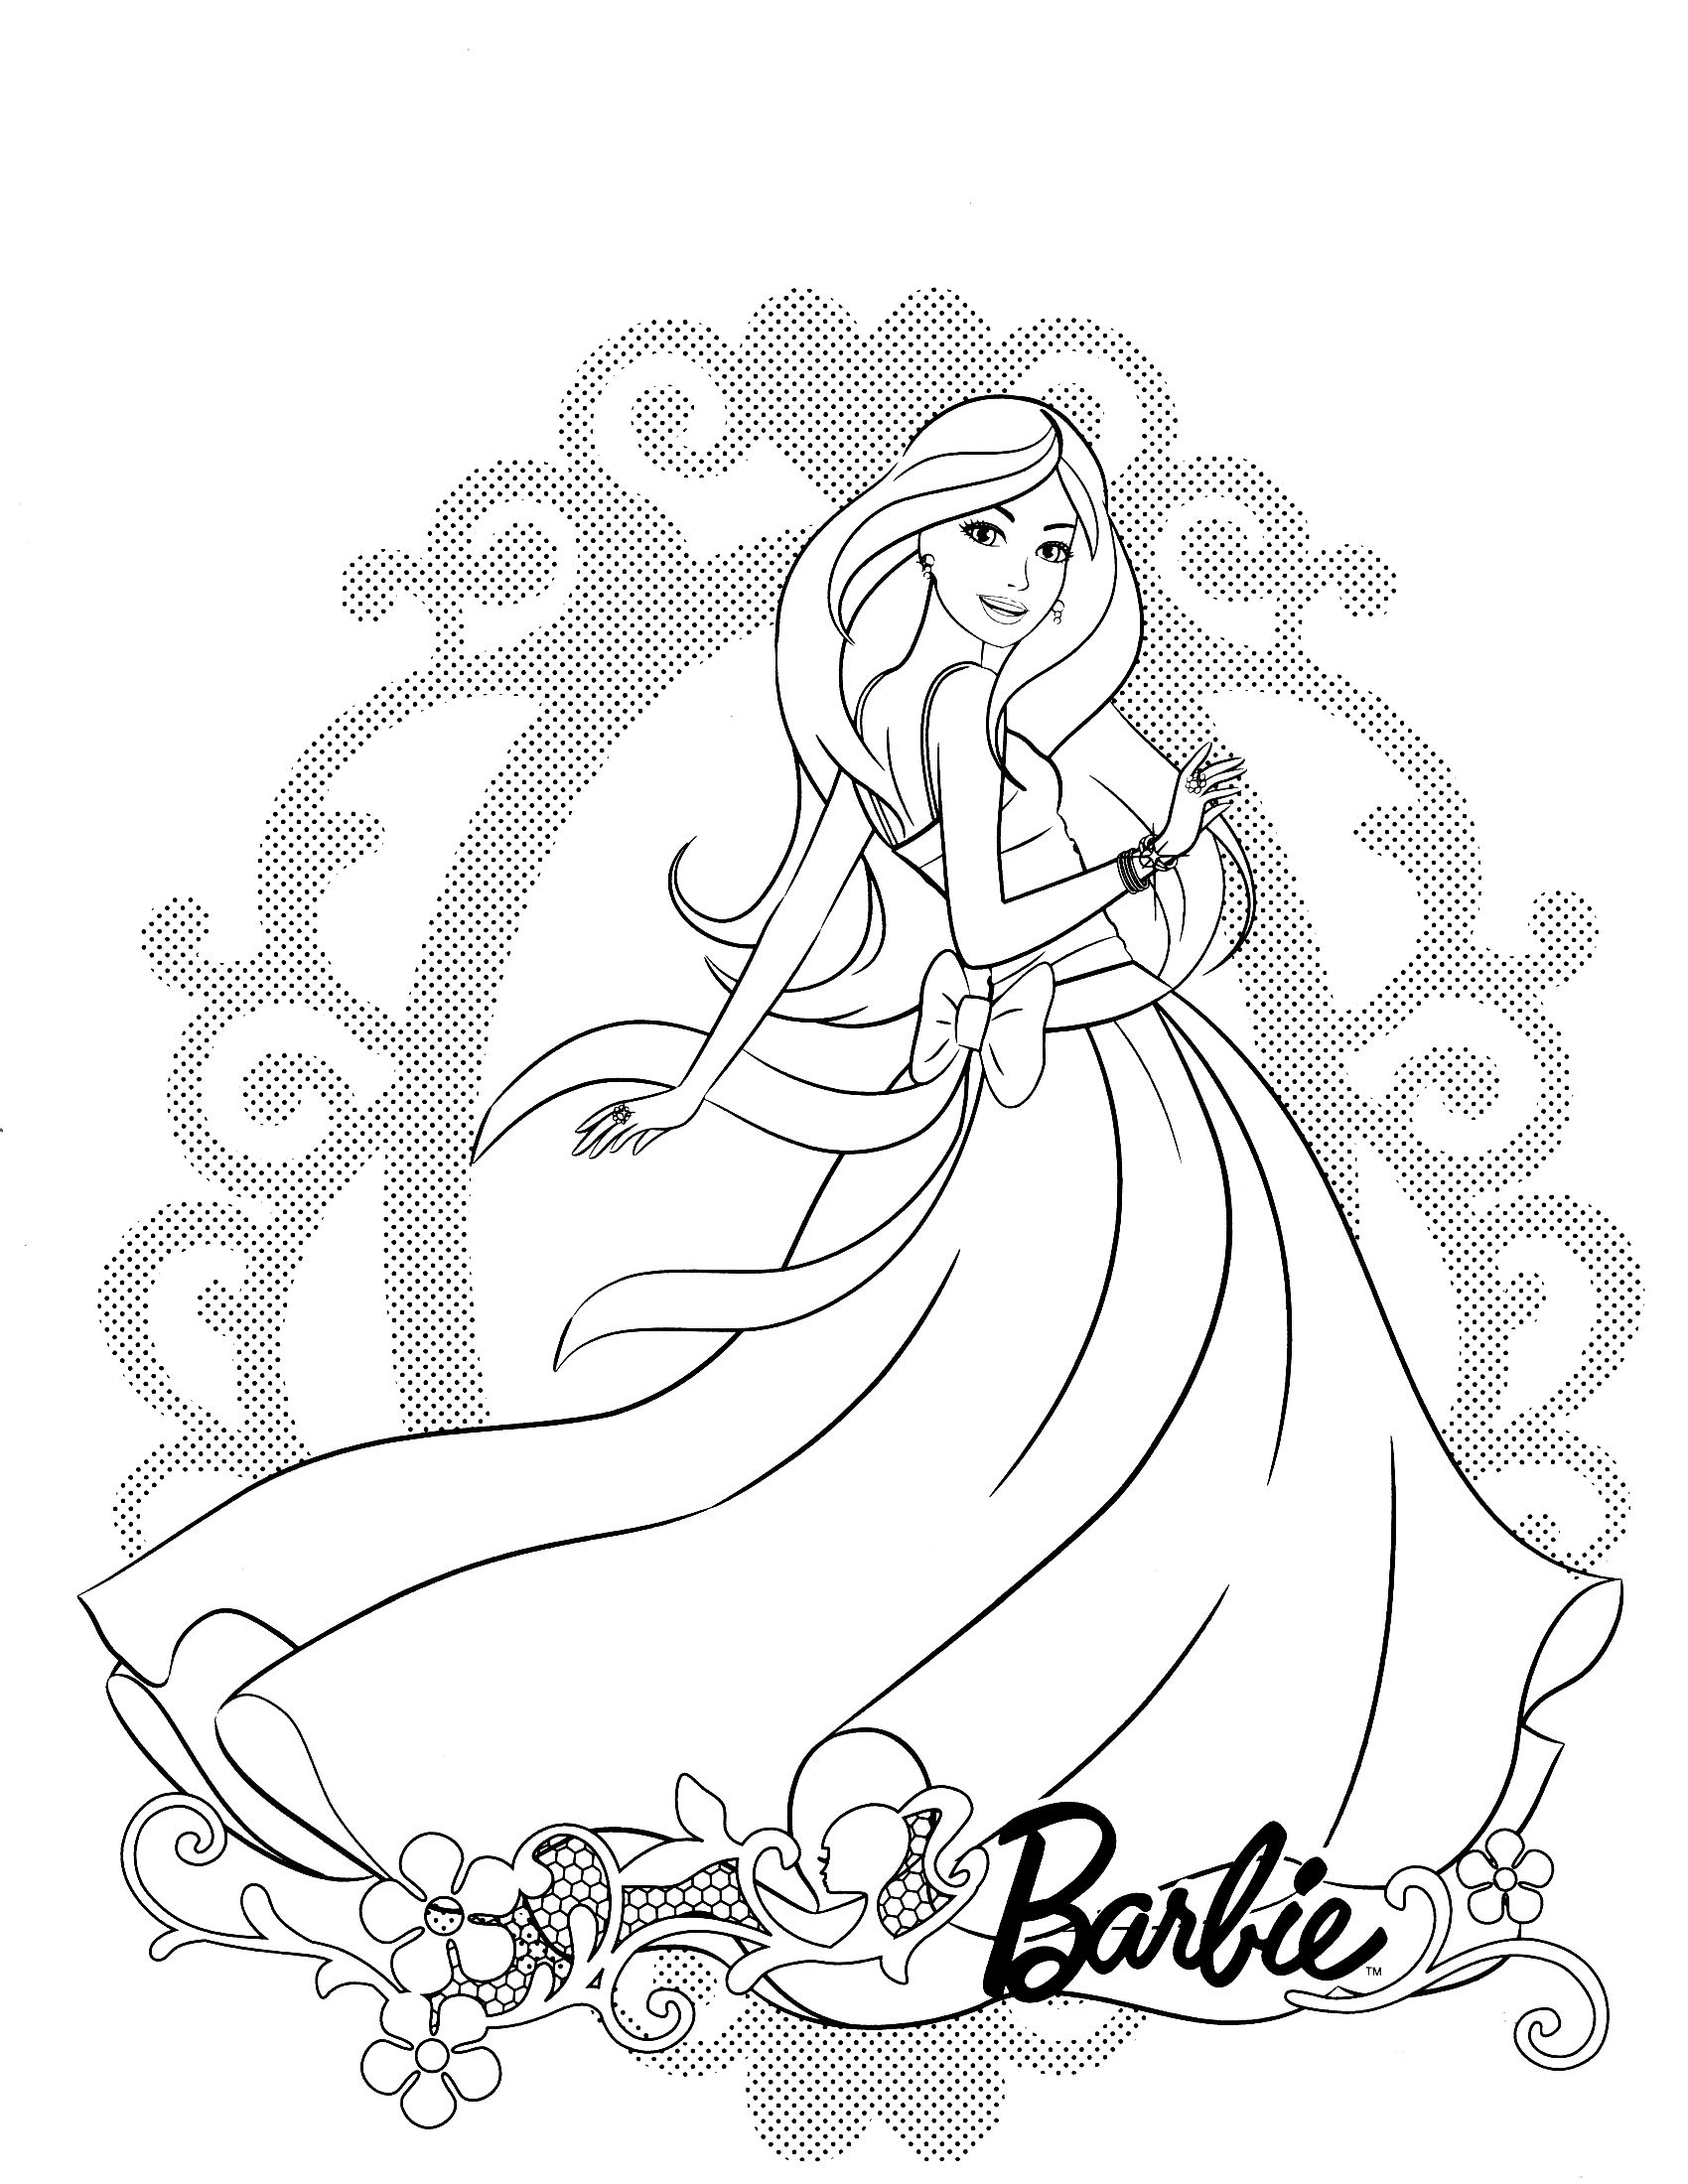 Barbie Life In The Dreamhouse Coloring Pages at GetColorings.com | Free